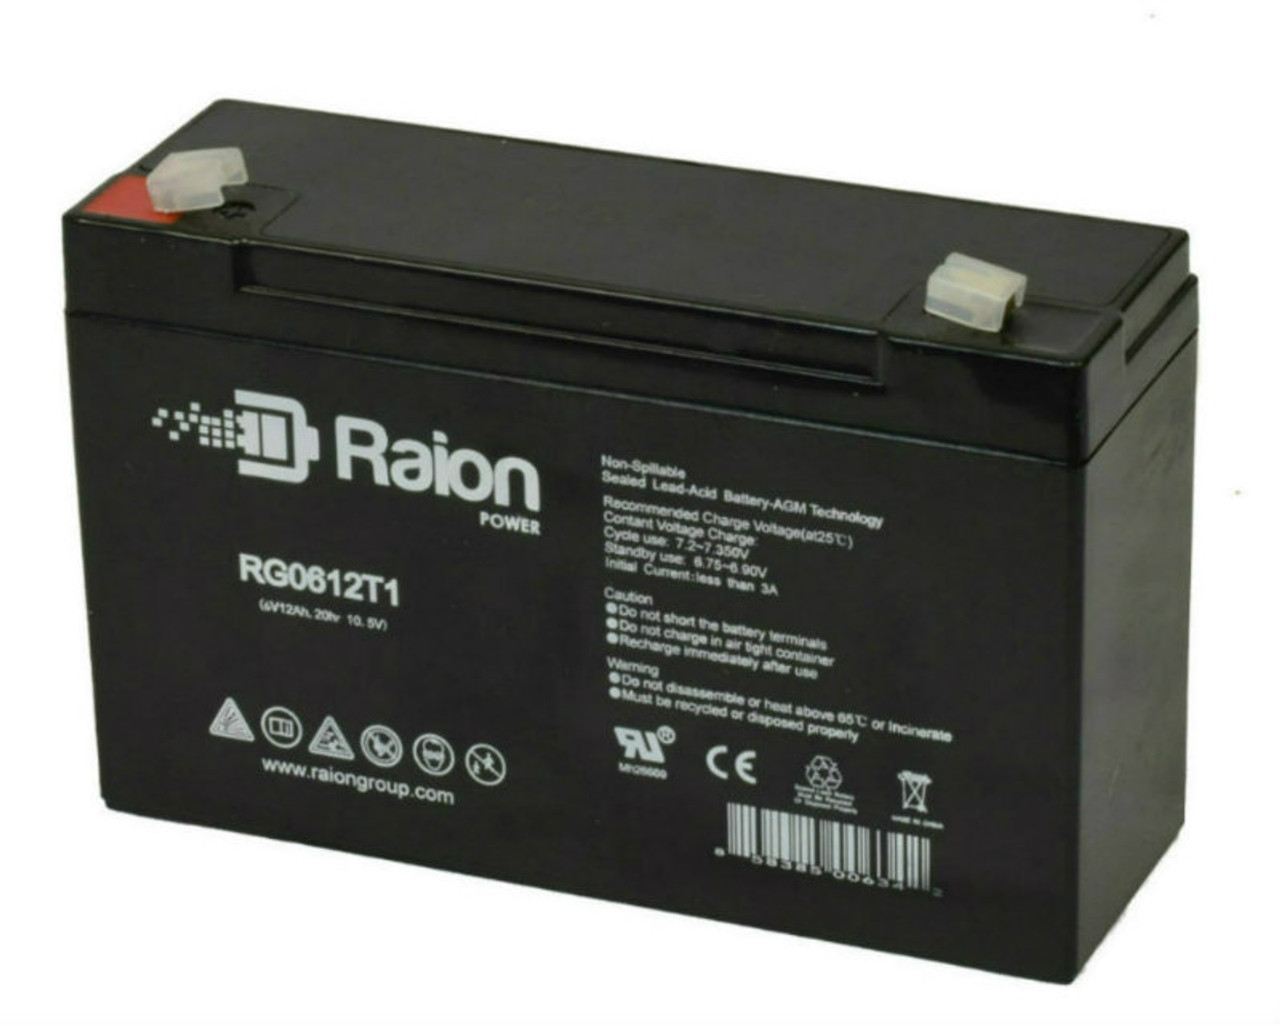 Raion Power RG06120T1 Replacement Battery for Leoch DJW6-10